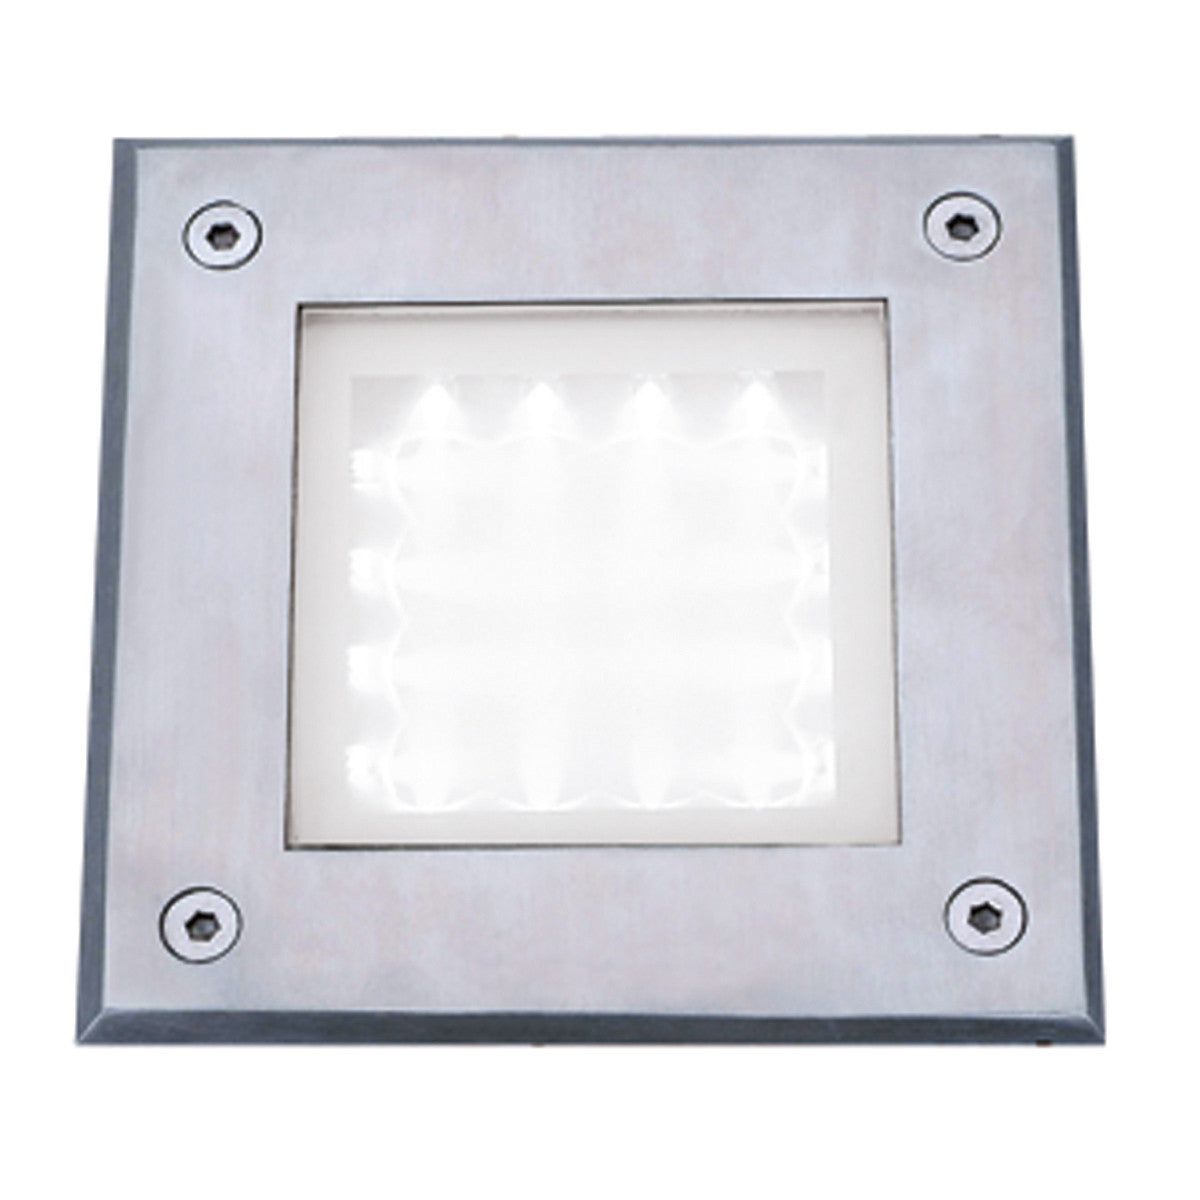 STAINLESS STEEL IP68 16 LED RECESSED SQUARE WALKOVER WITH WHITE LED LIGHT - Cusack Lighting